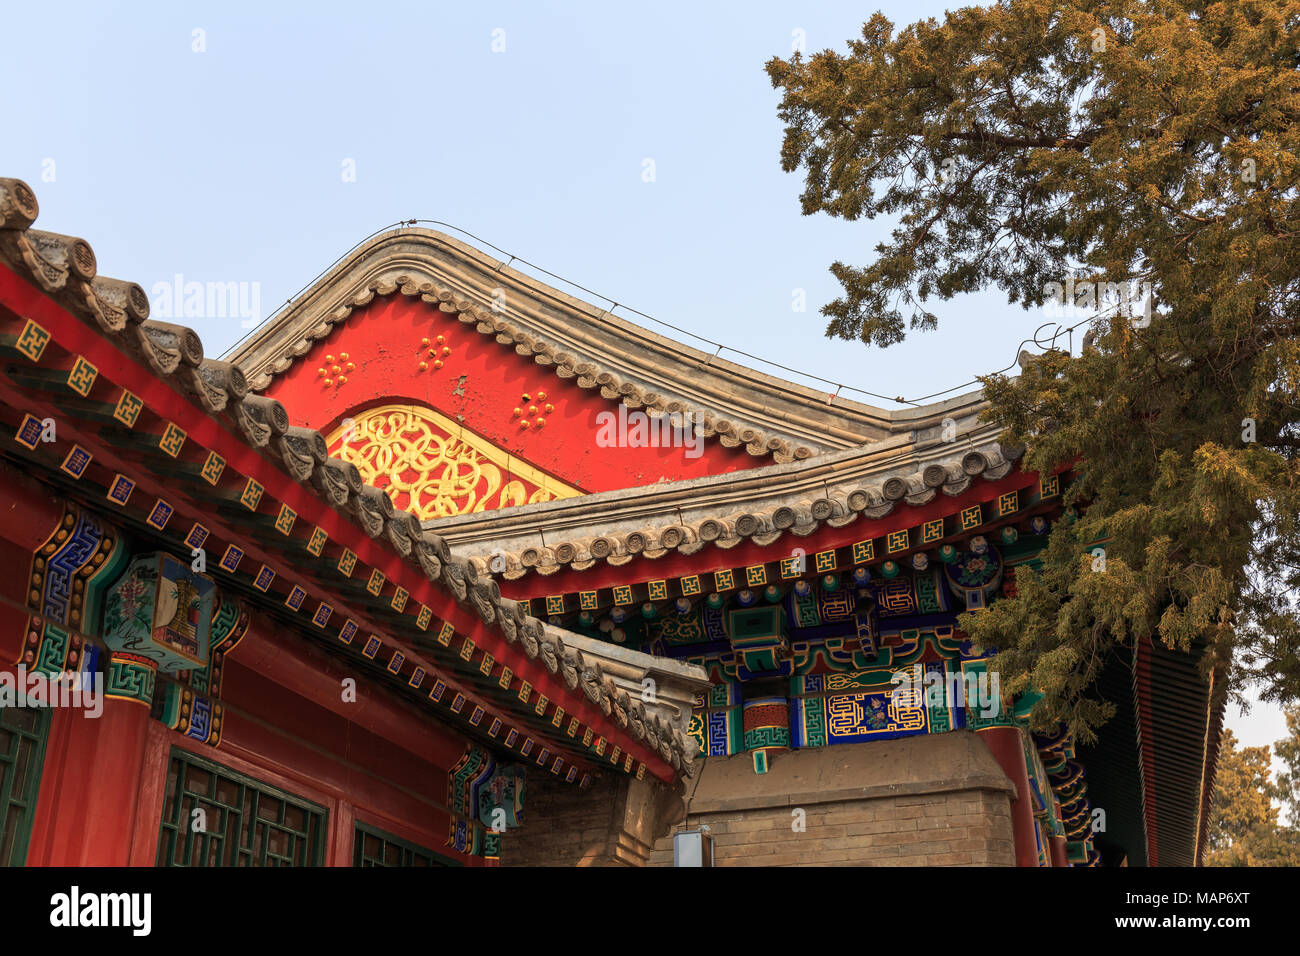 Details of traditional Chinese architecture at Beihai Park in Beijing, China. Stock Photo